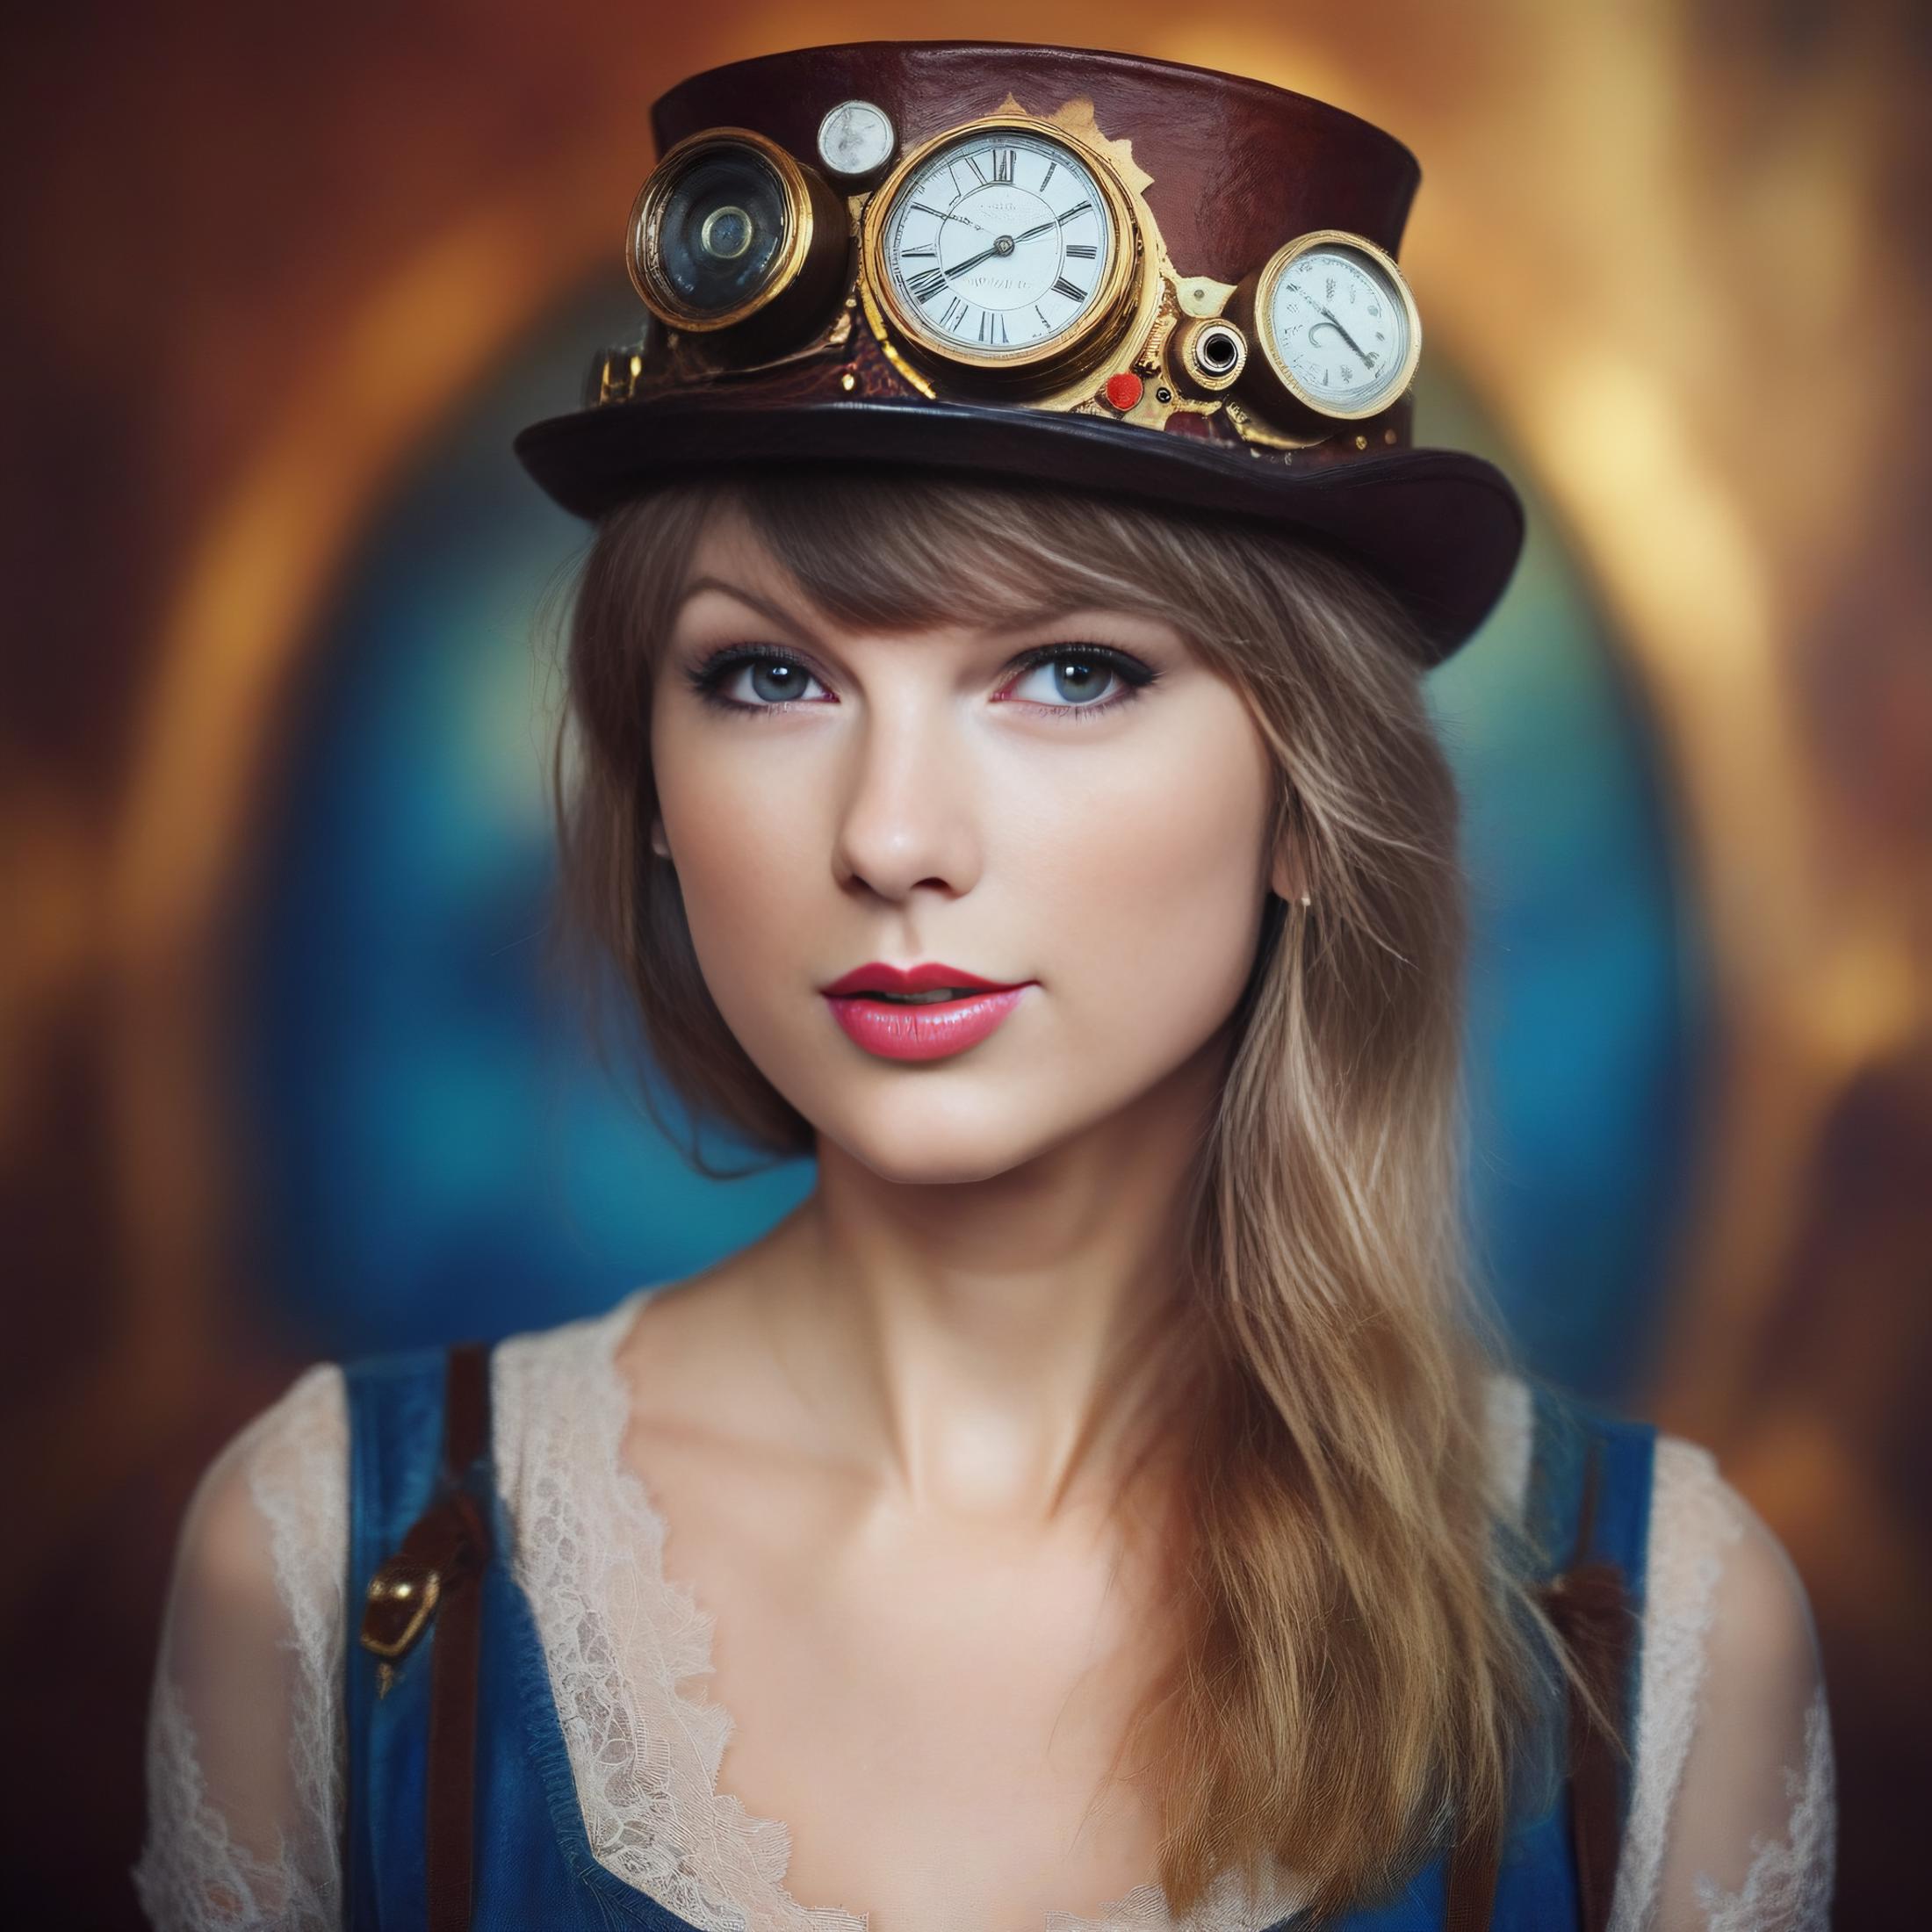 Taylor Swift image by parar20